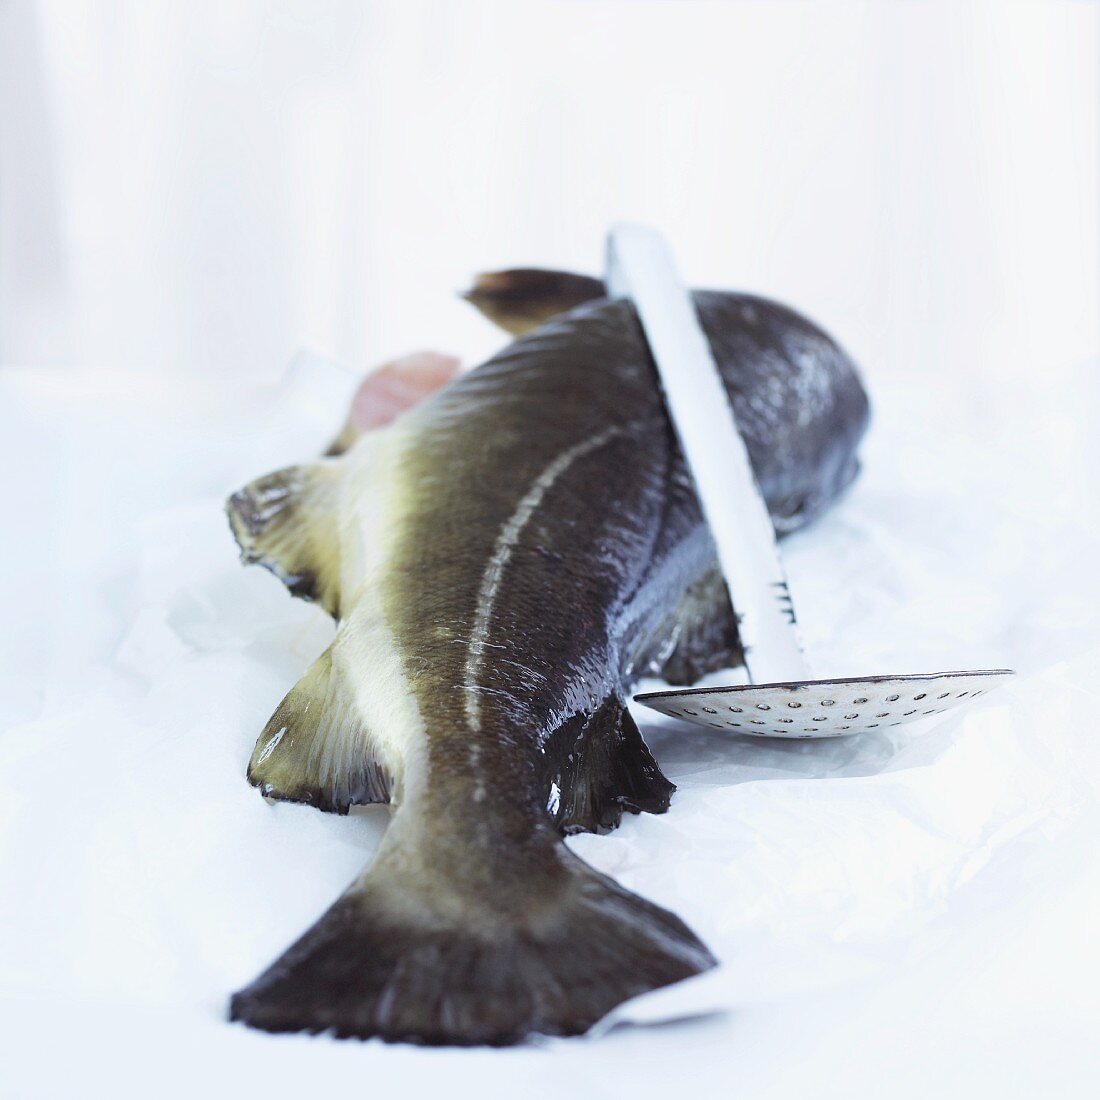 A whole cod and a draining spoon